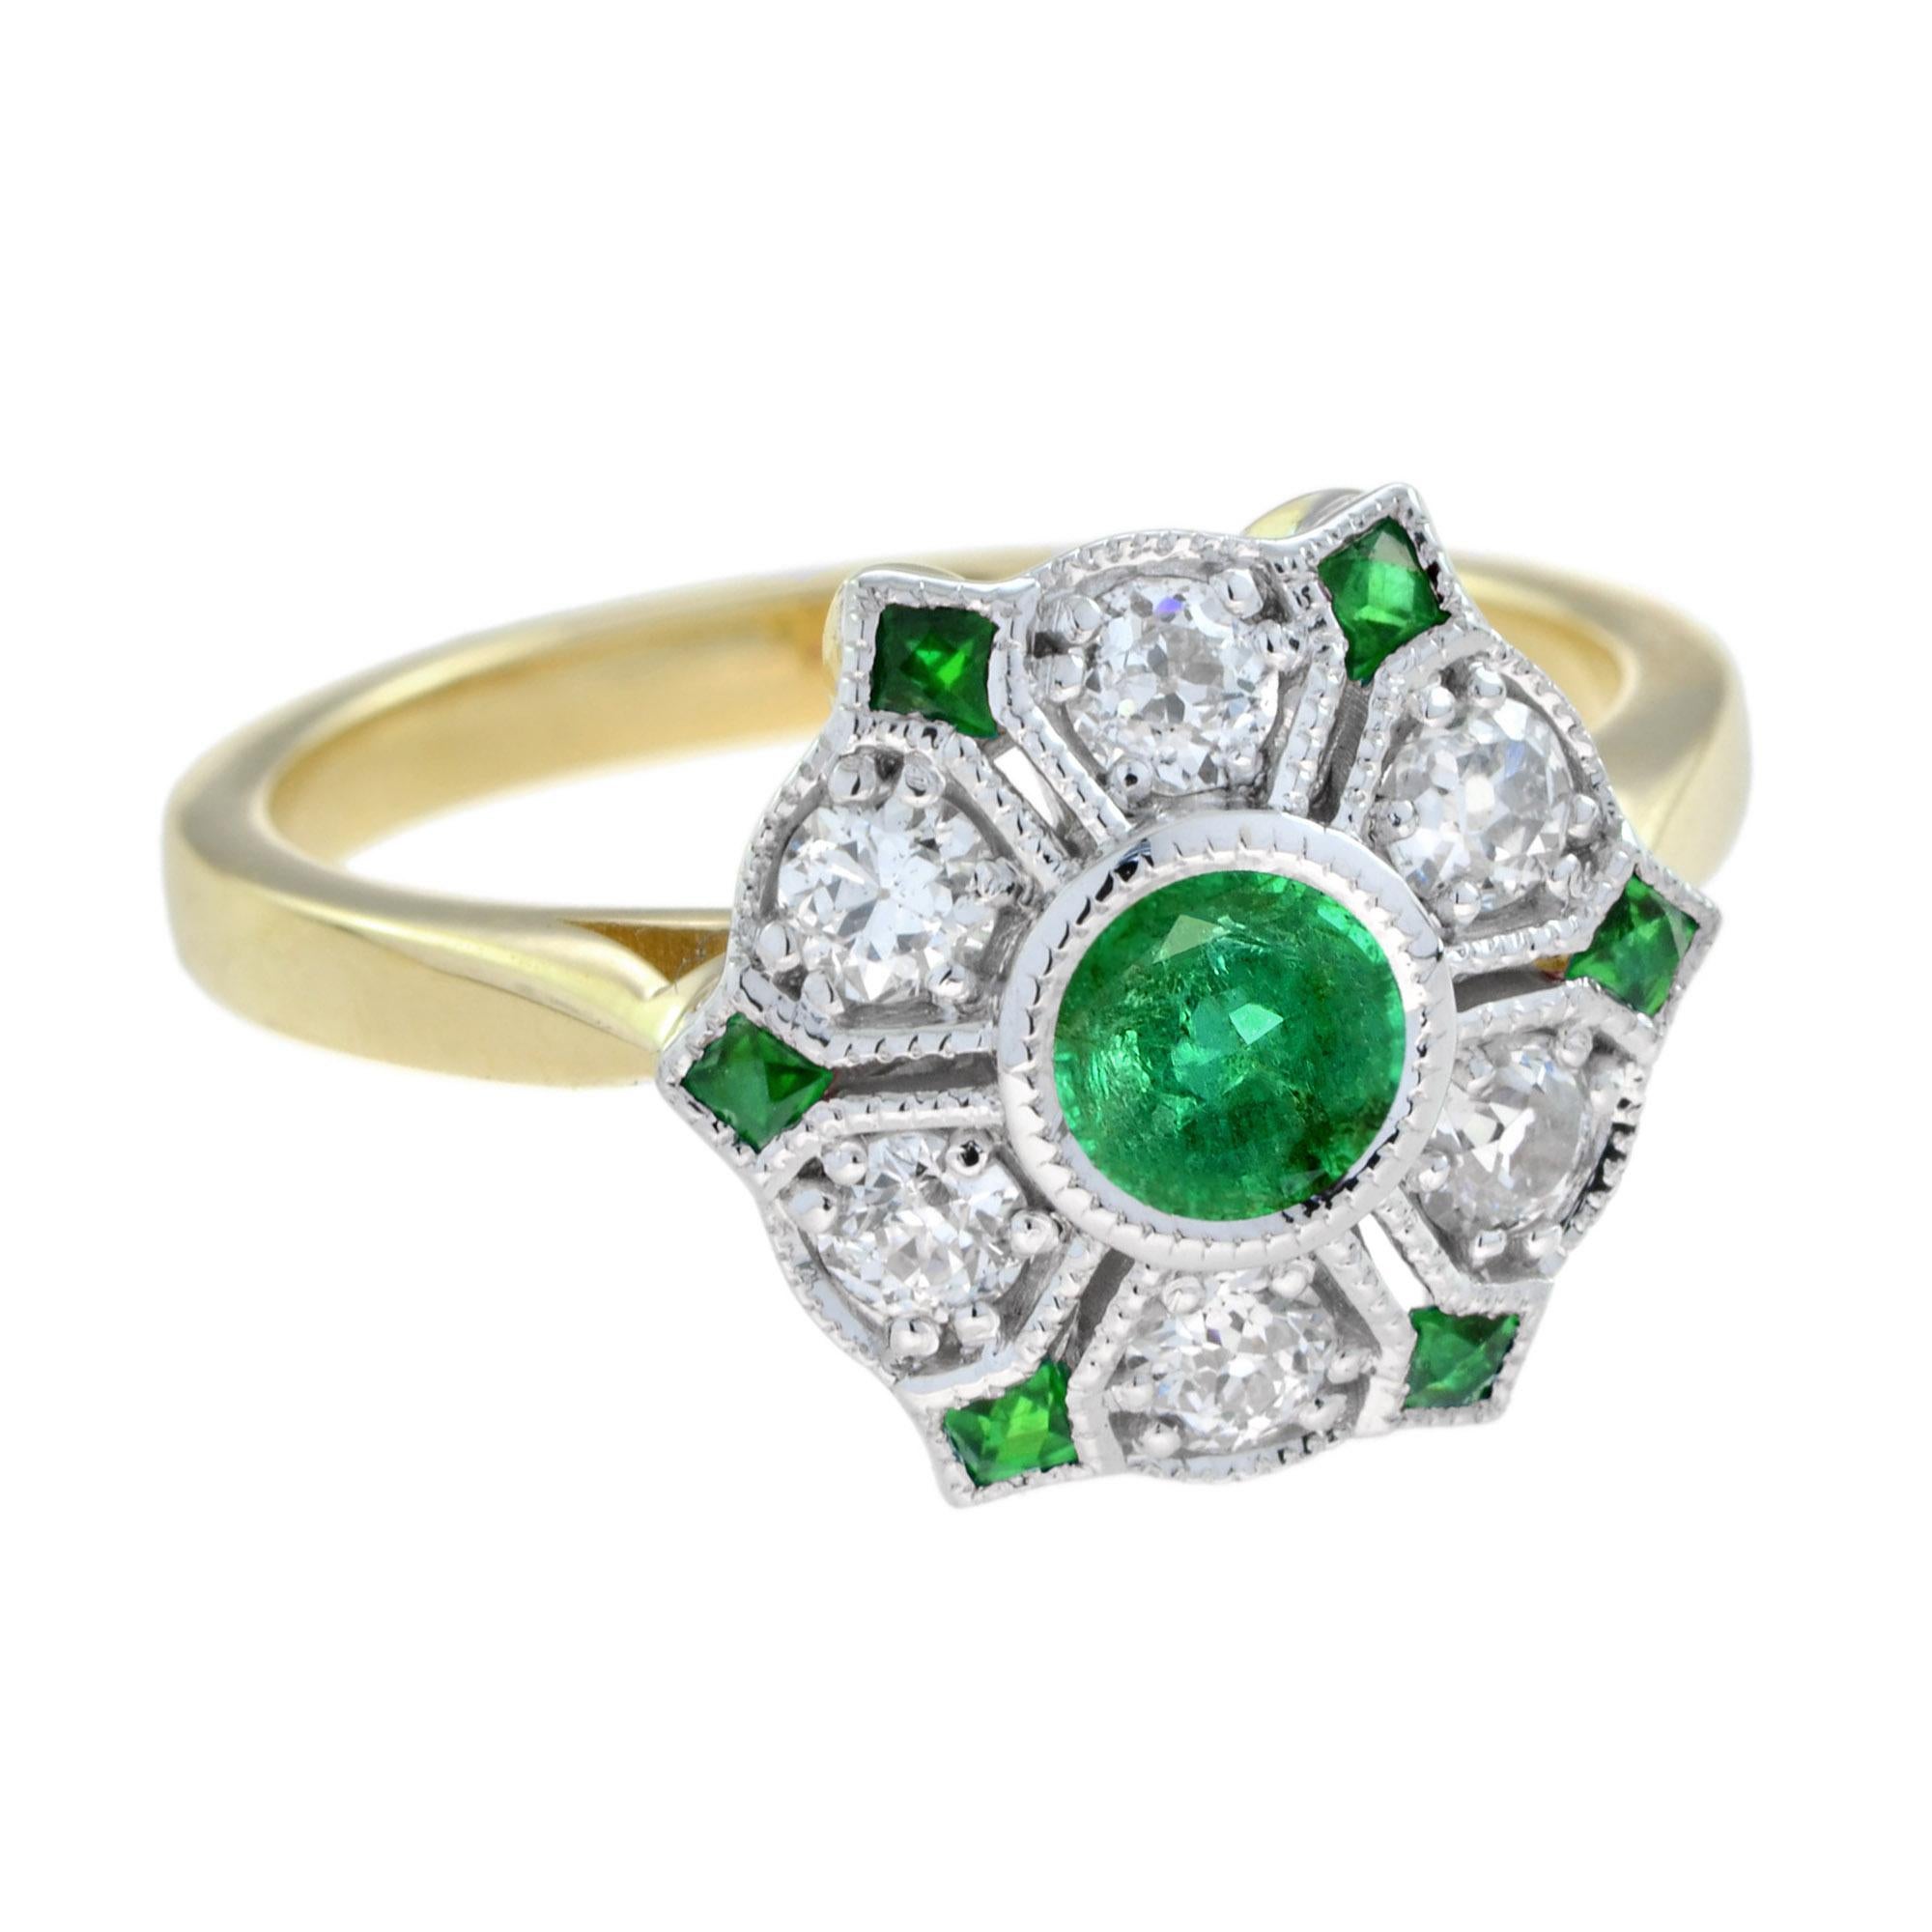 A lovely floral ring for anyone who loves antique-inspired jewelry. Made of round cut emerald and dazzling diamond set on 18k white top diamond part yellow gold. A center emerald form a flower with diamond and French cut emeralds petals design for a